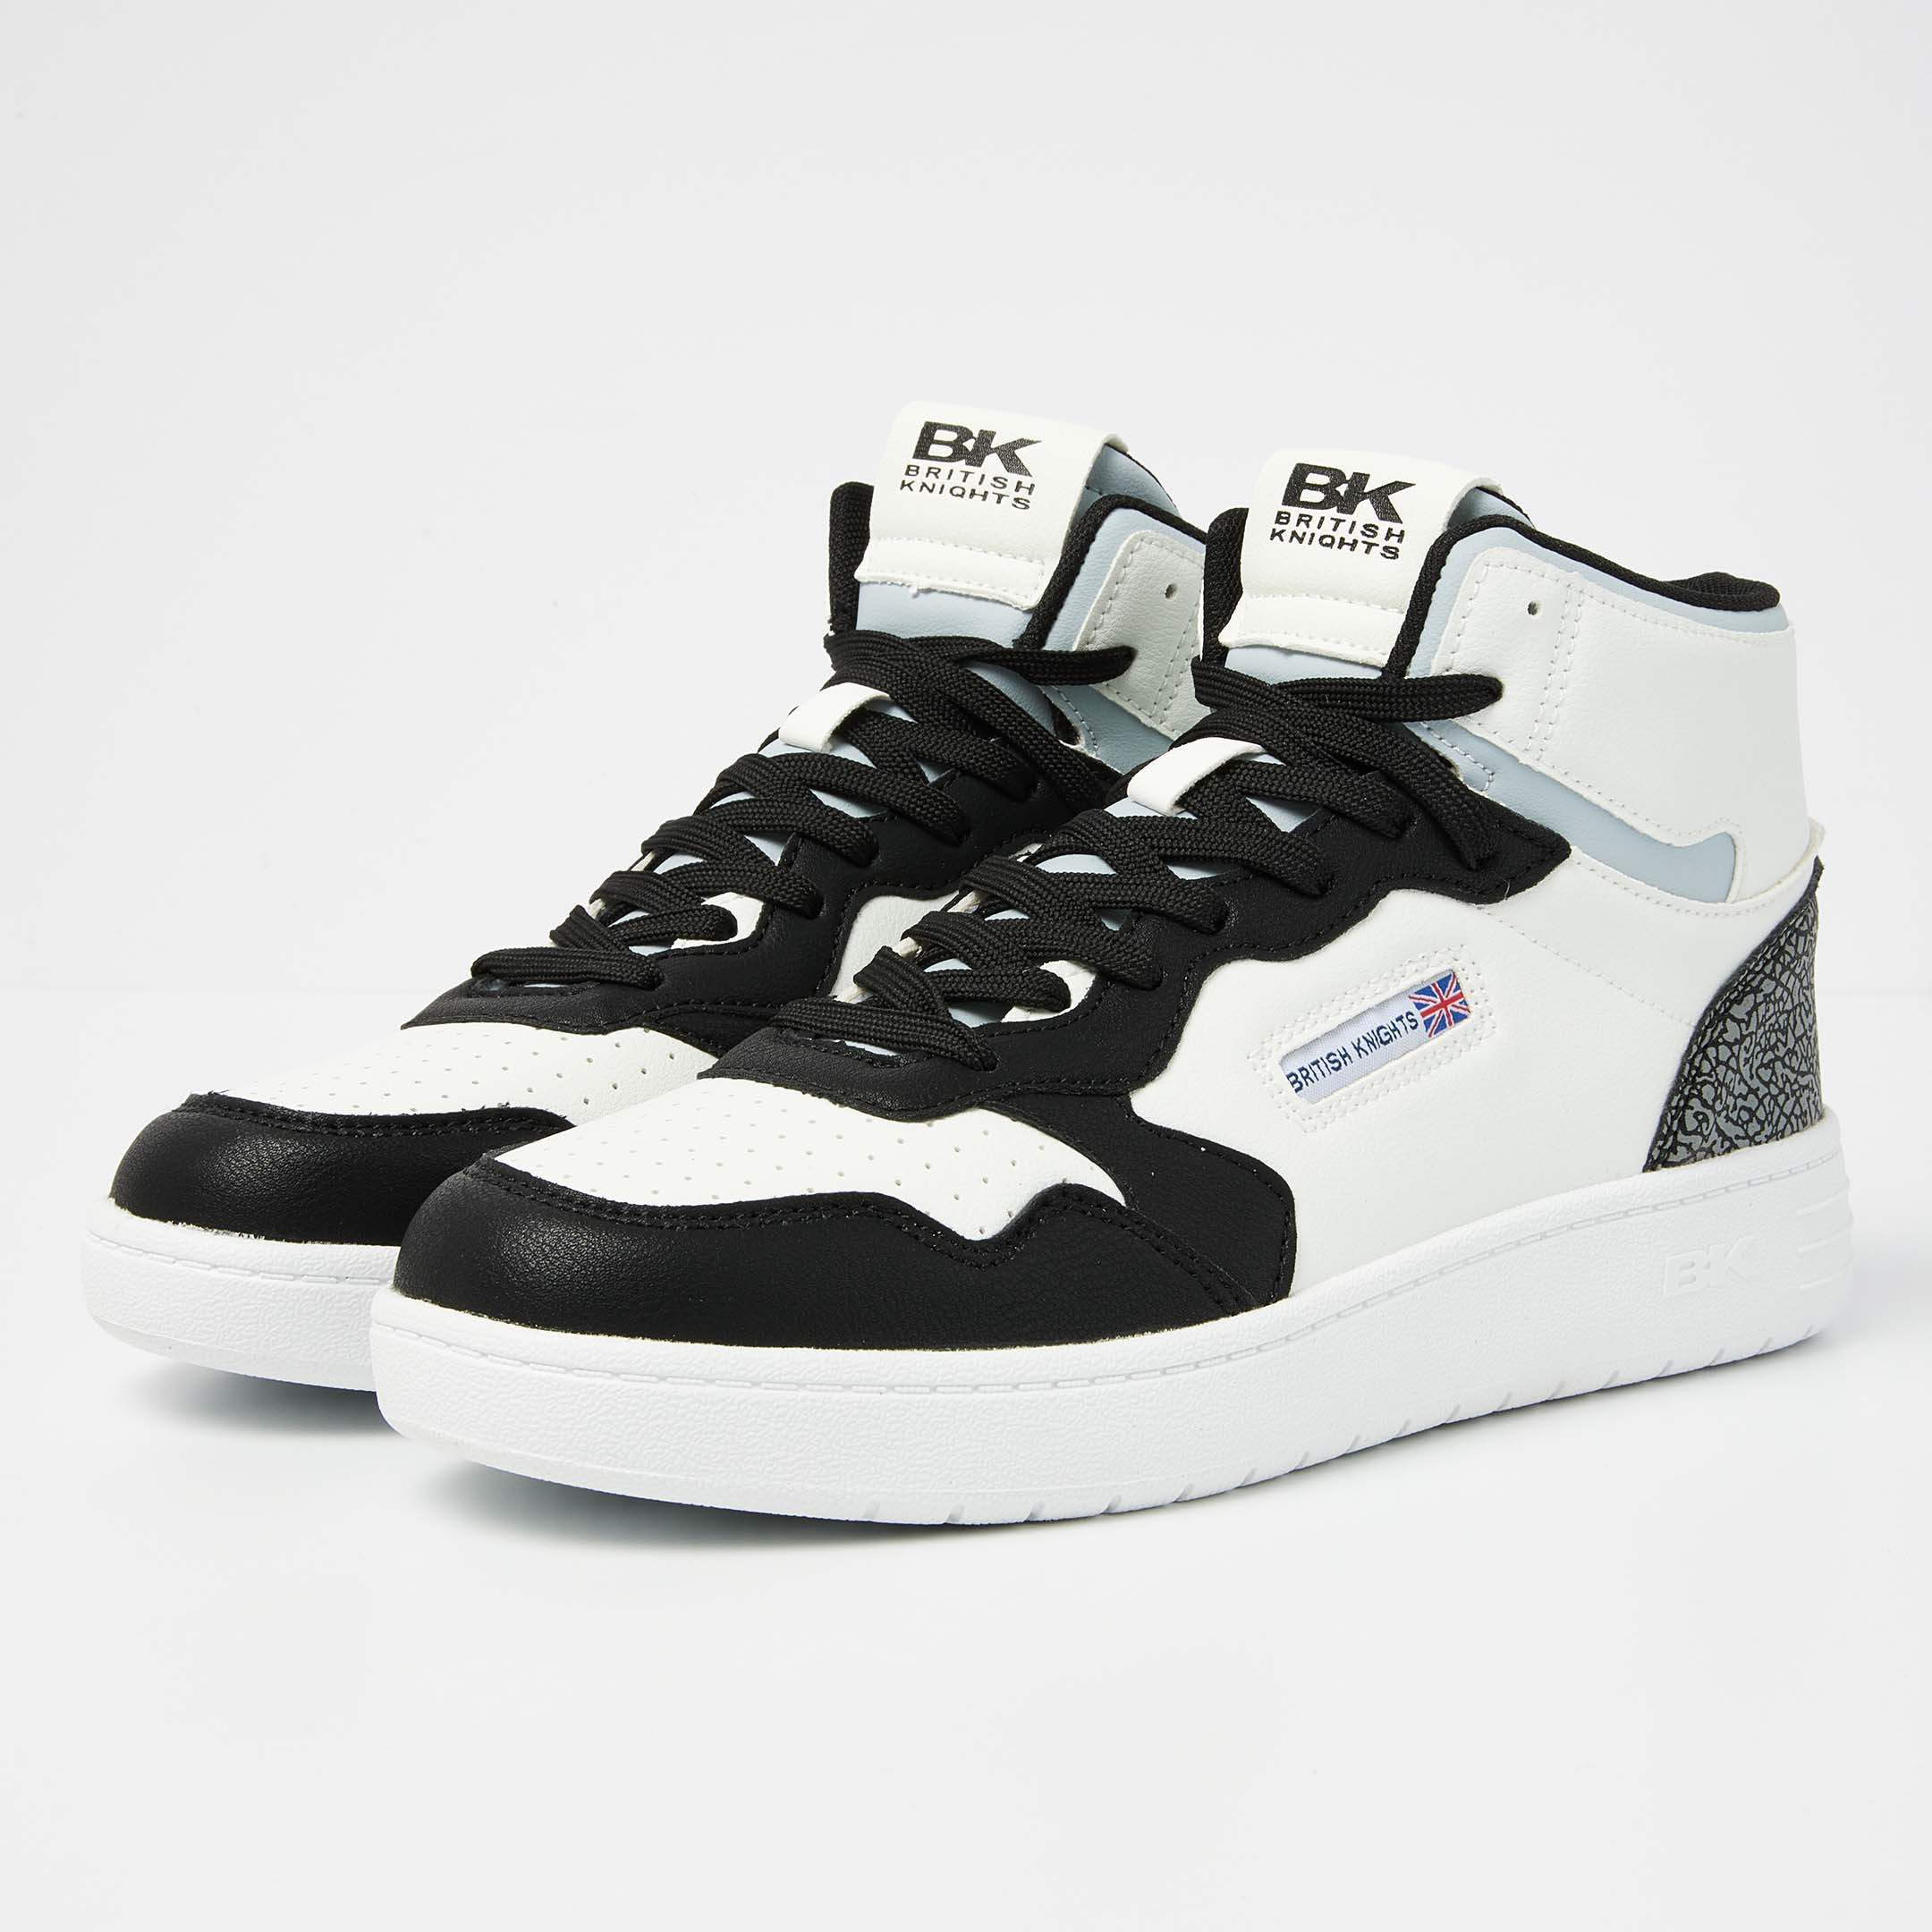 British Knights Sneaker Front view  B53-3617-03 NOORS MID HIGH-TOP MALE